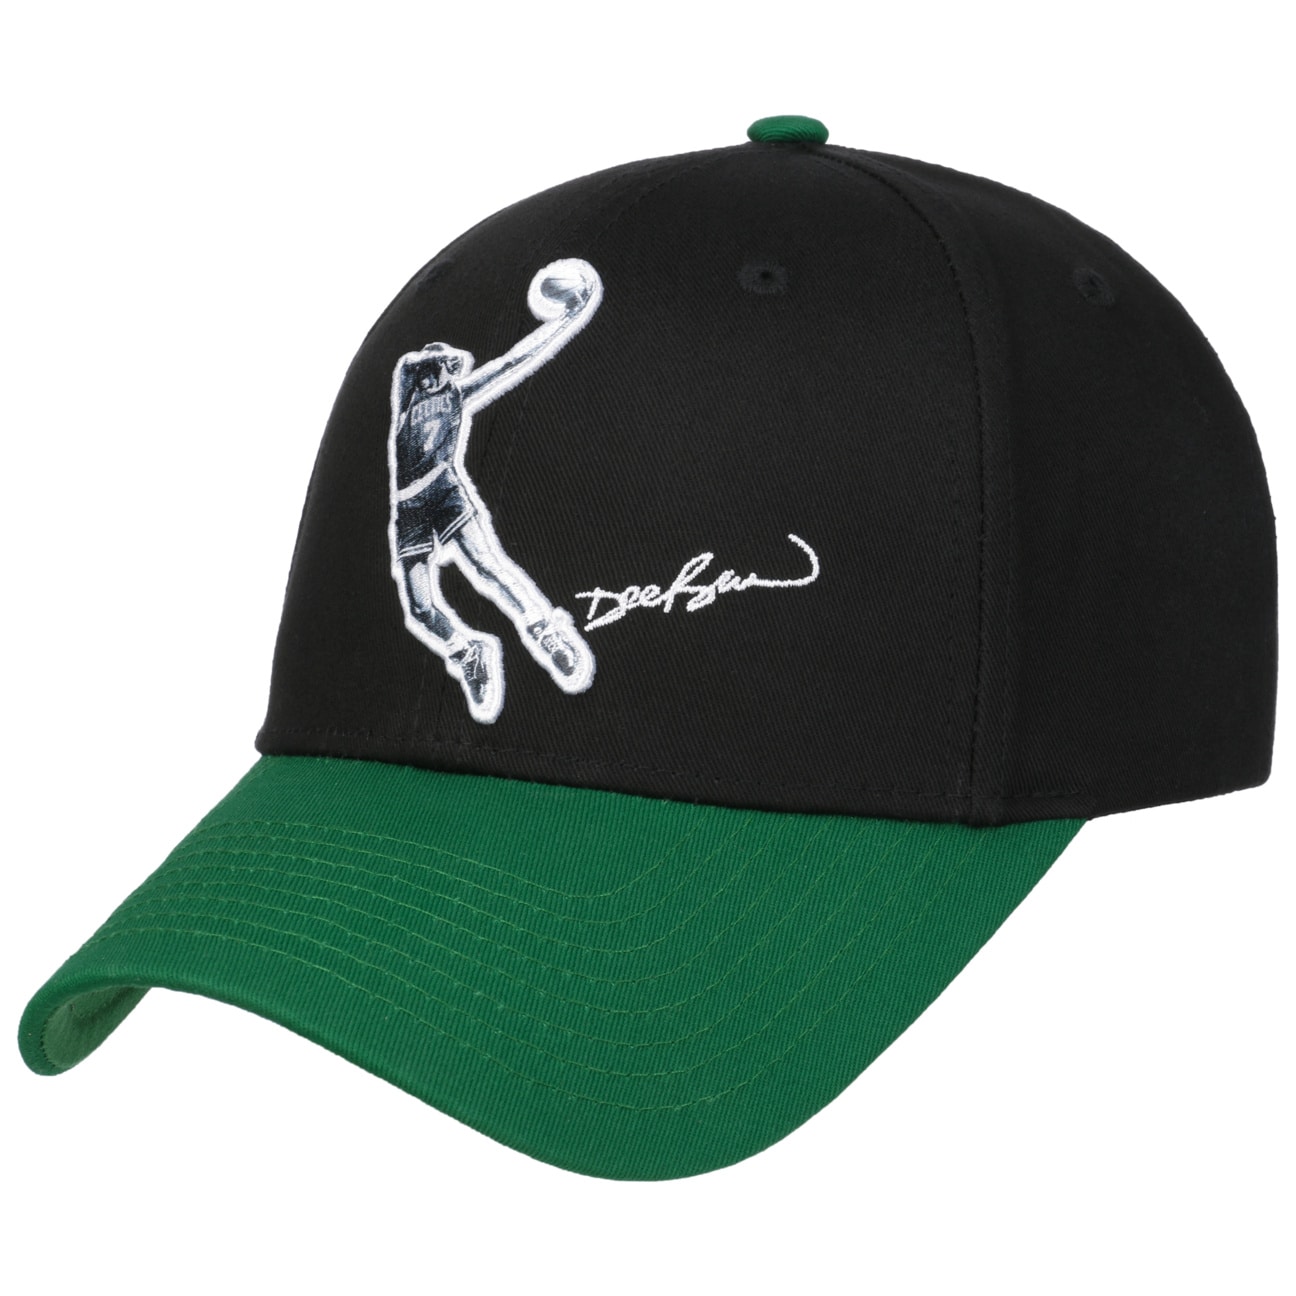 Highlight Real Snapback Cap by Mitchell & Ness von Mitchell & Ness